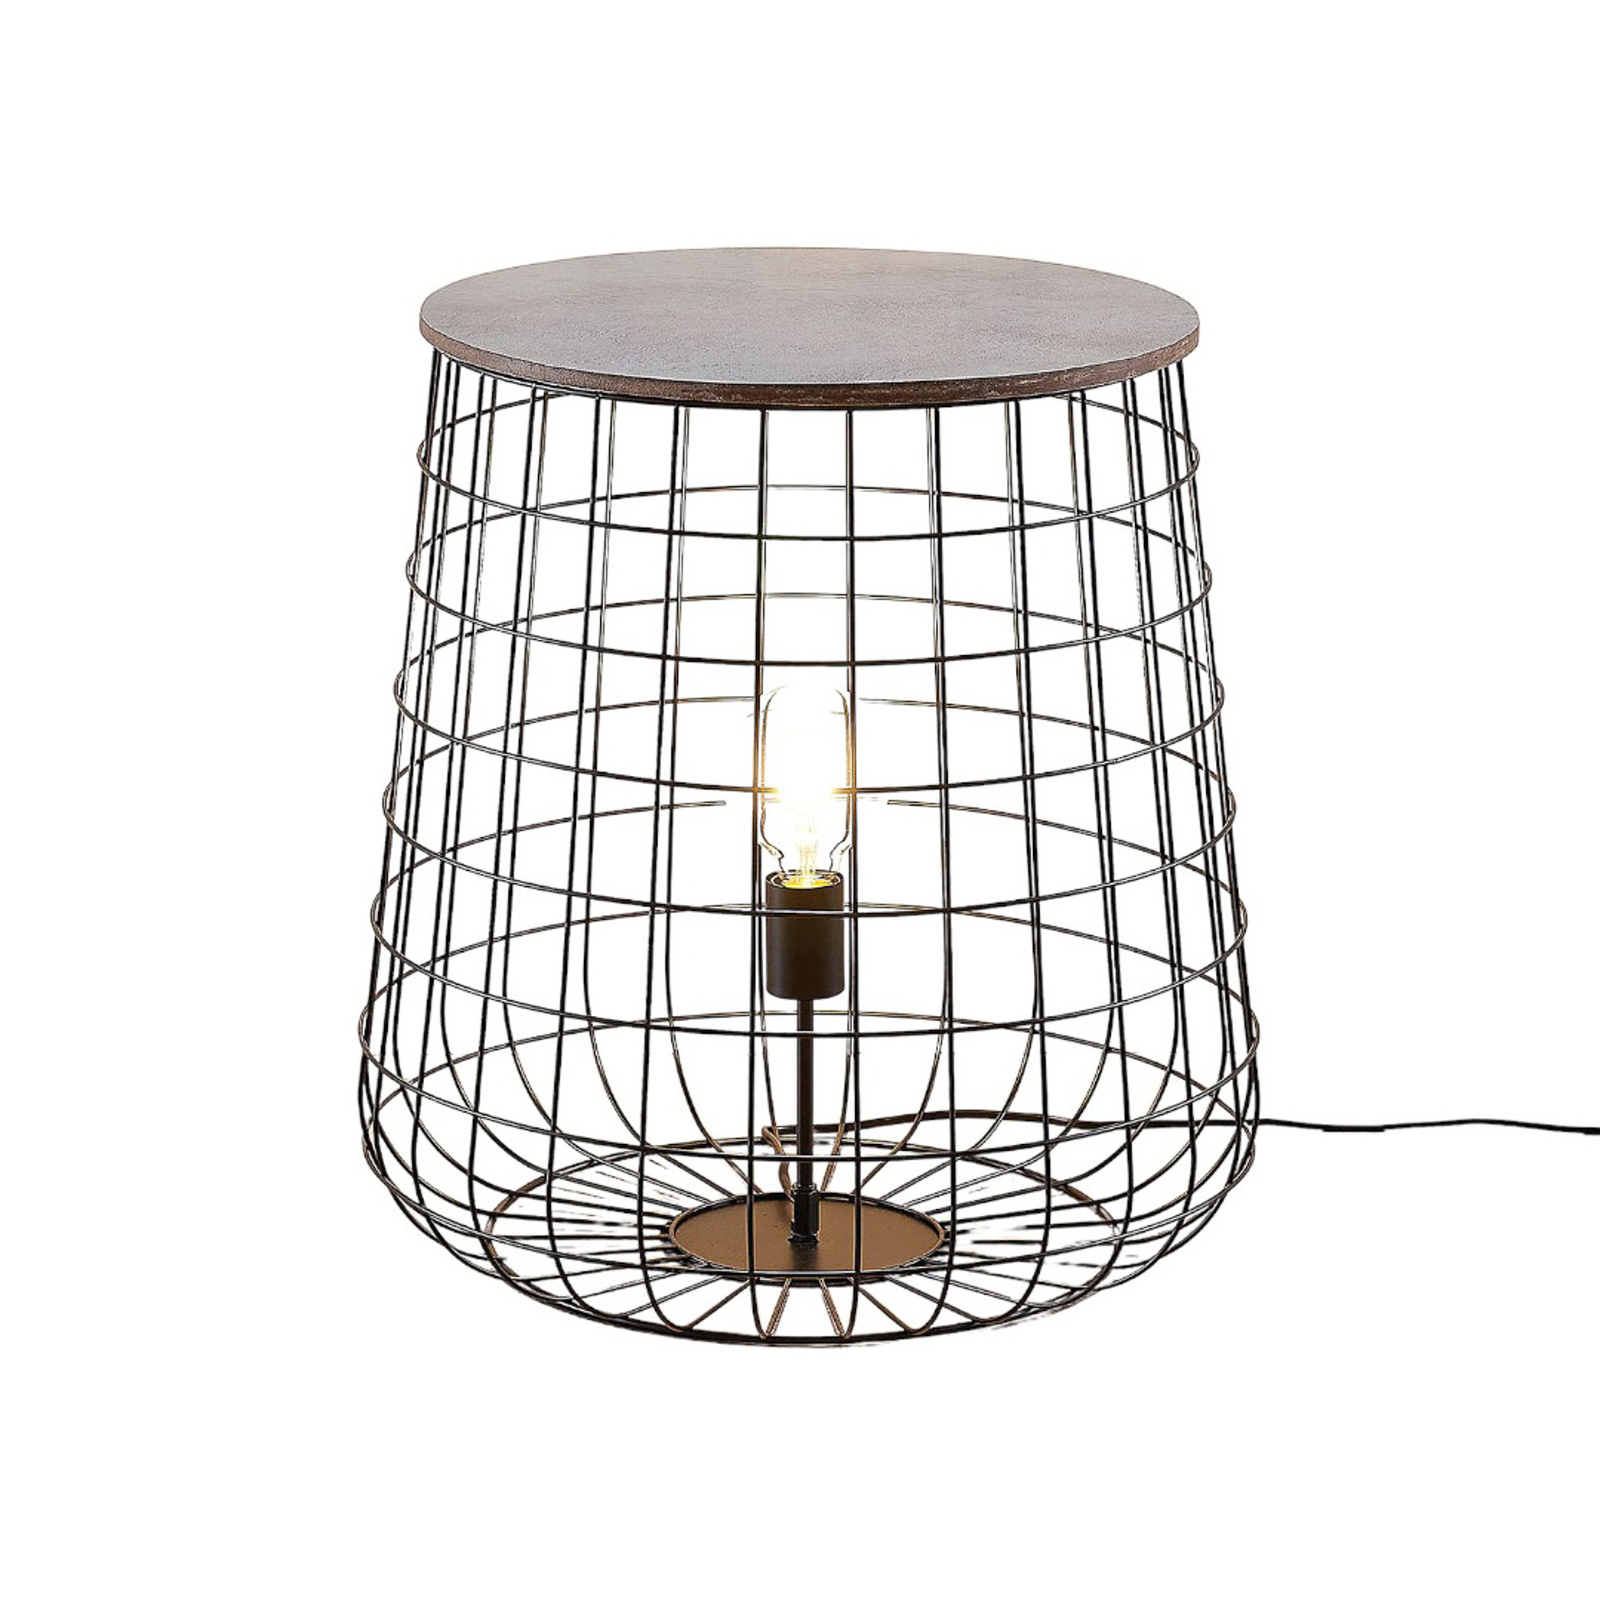 Lindby Winnie basket floor lamp with wooden panel